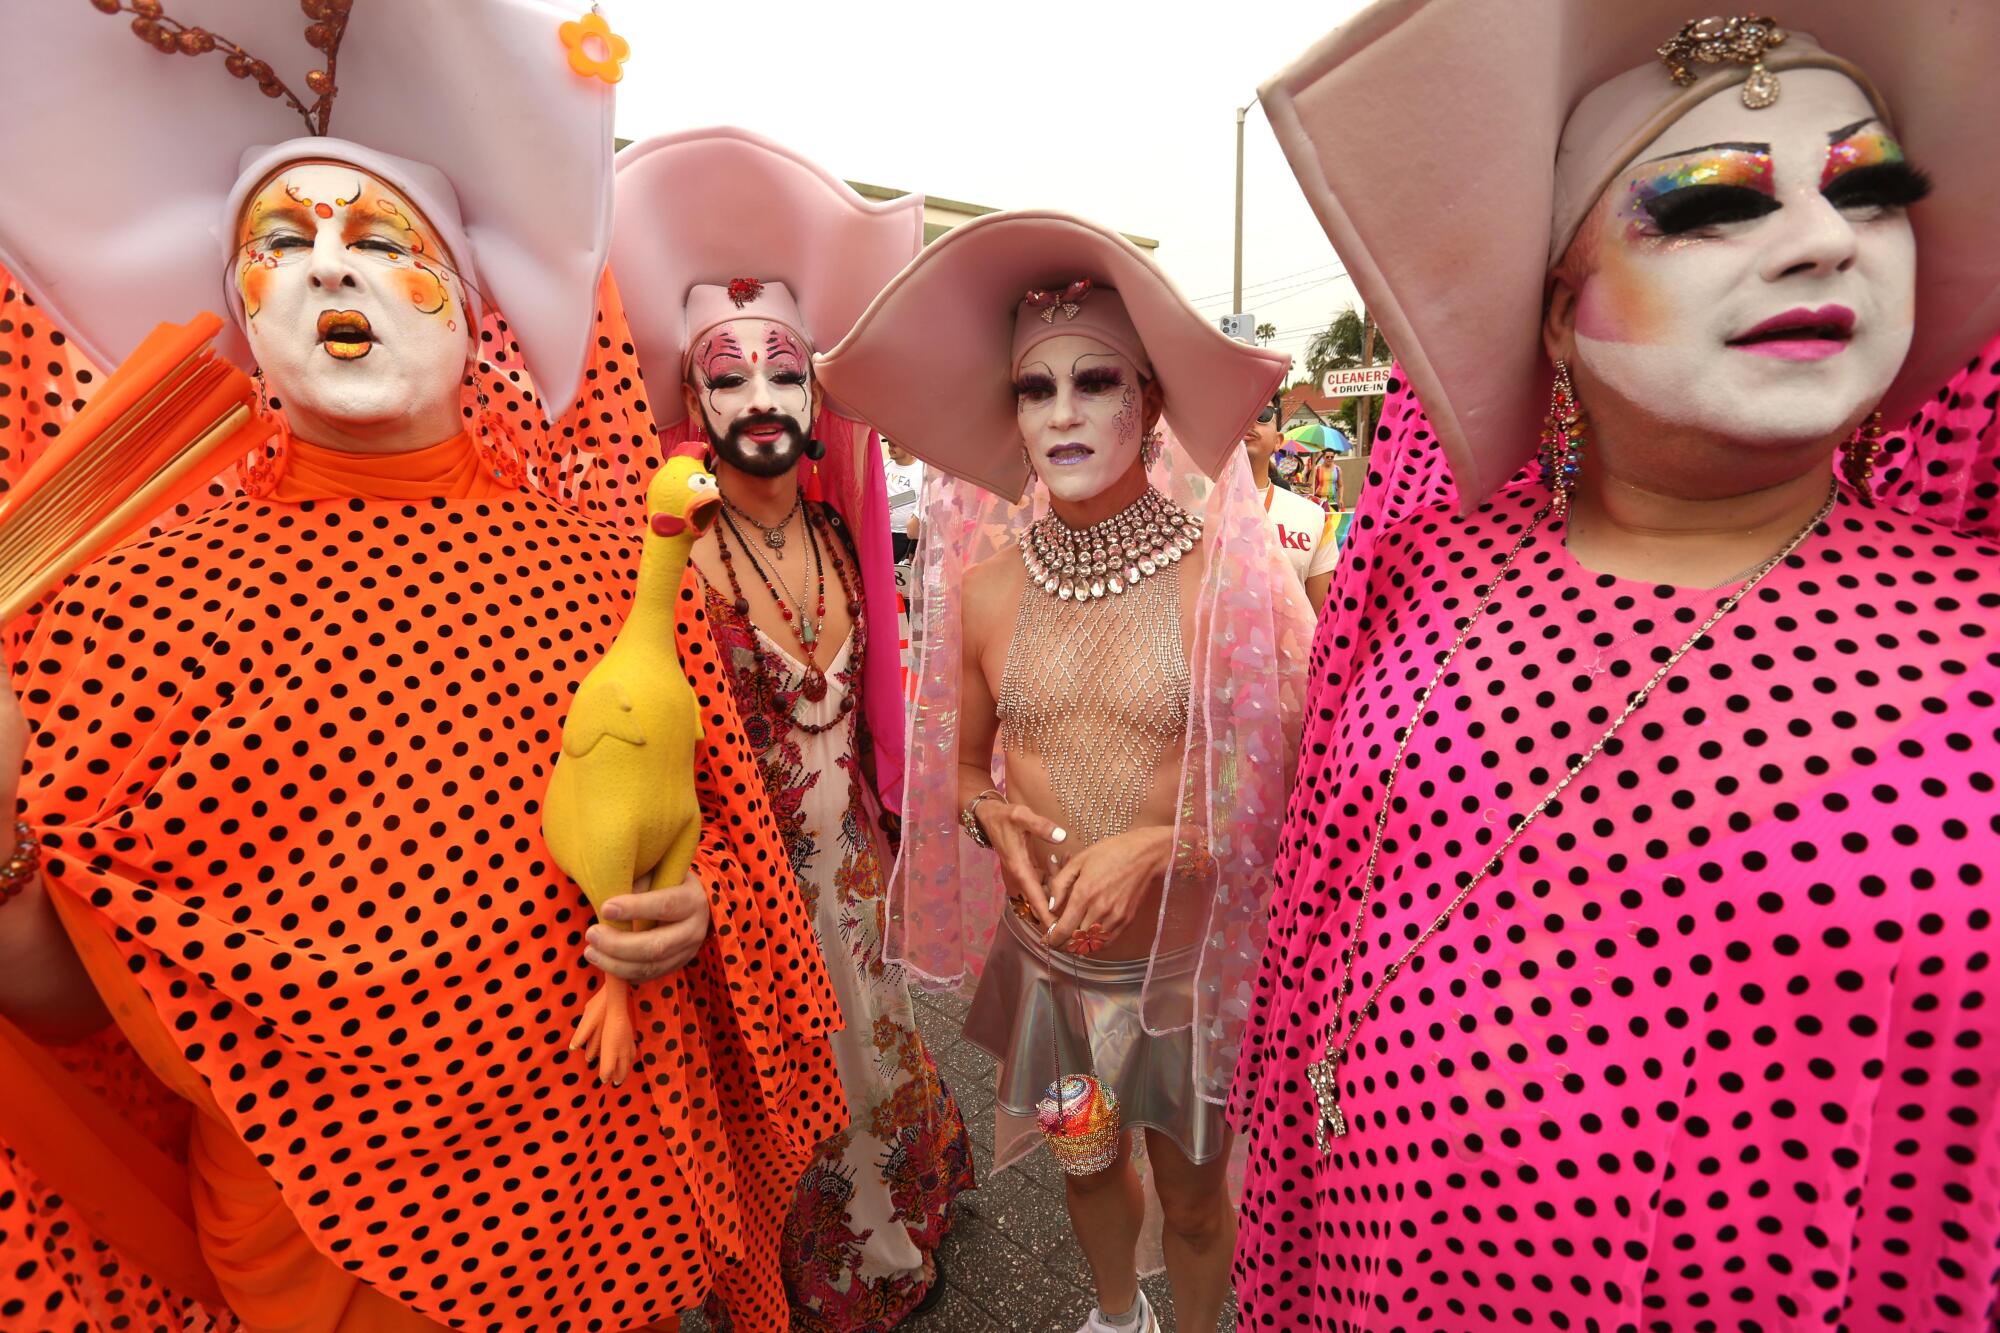 Drag nuns in white makeup and bright pink and orange gowns with black polka dots.